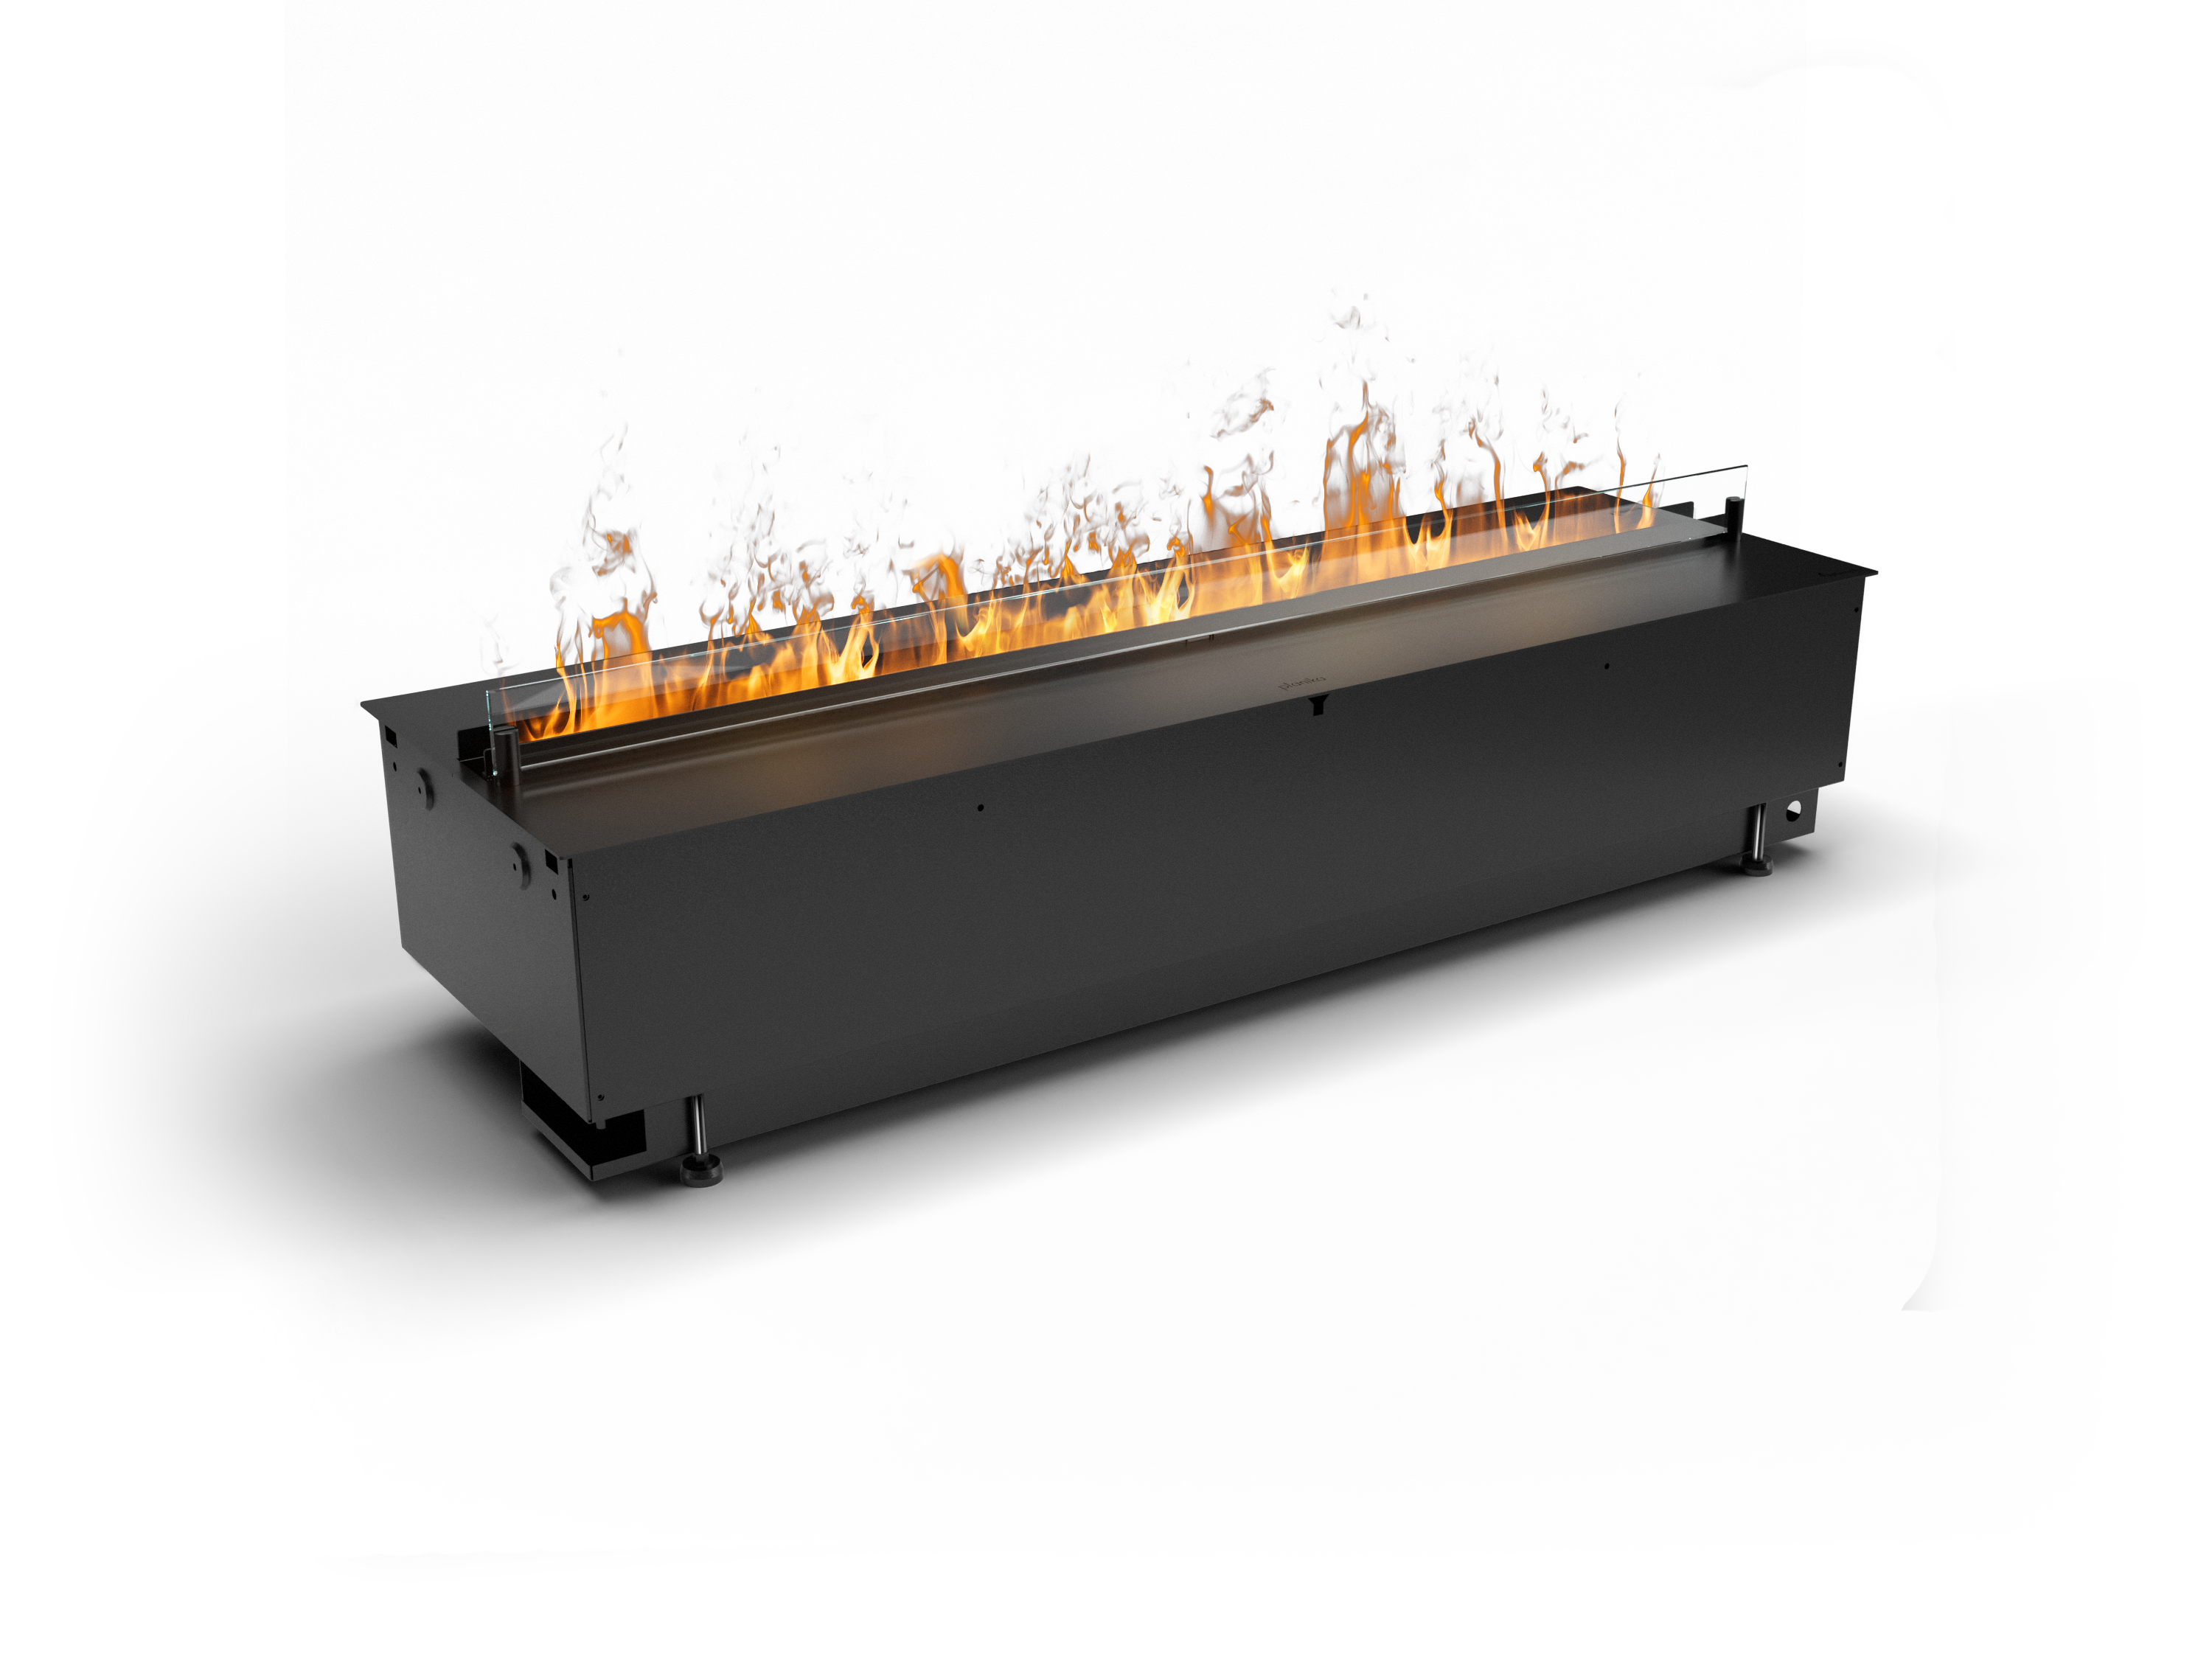 Cool-flame-1000-Pro-insert